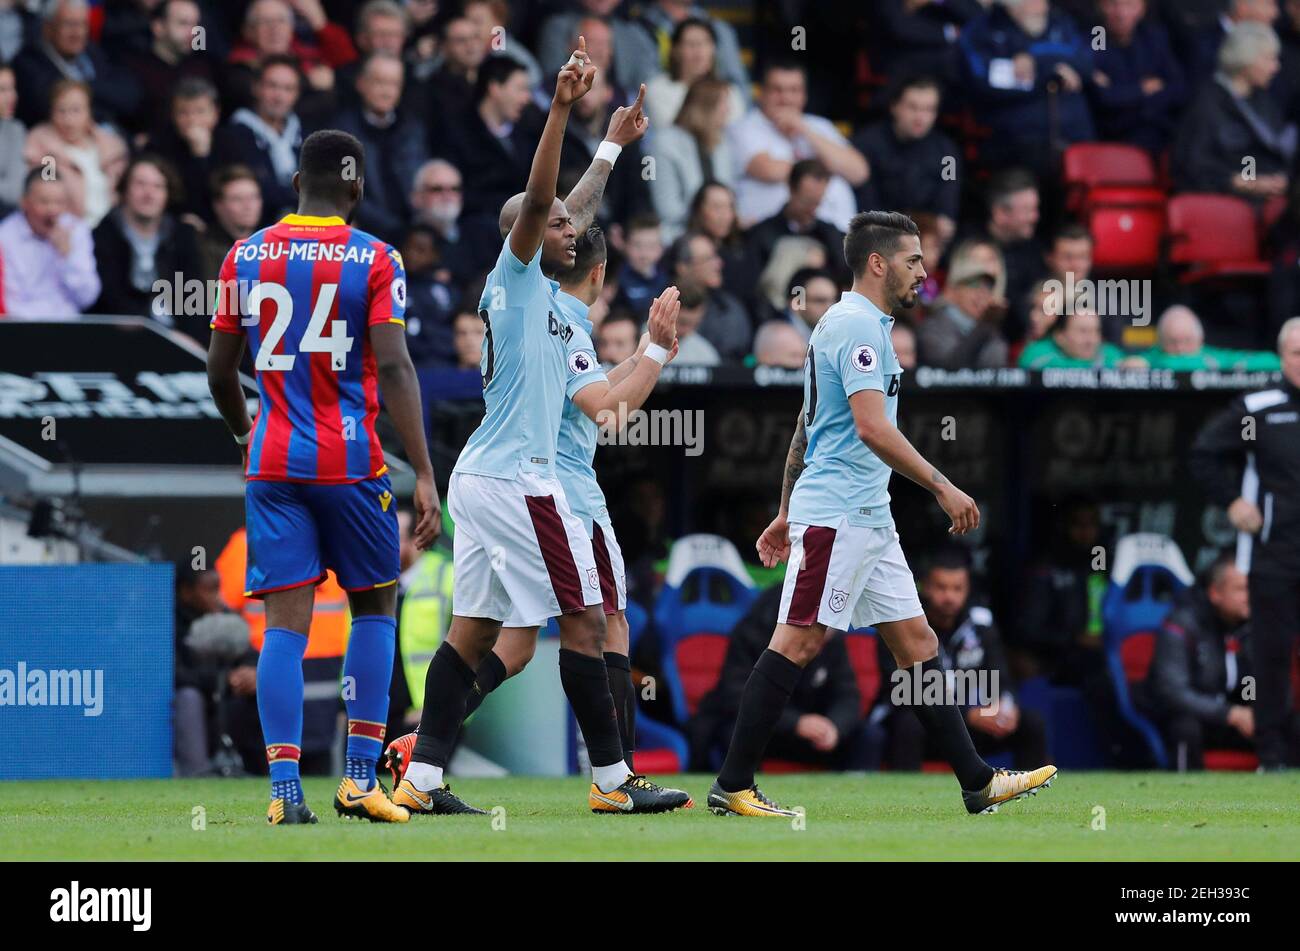 Soccer Football - Premier League - Crystal Palace vs West Ham United - Selhurst Park, London, Britain - October 28, 2017   West Ham United's Andre Ayew celebrates scoring their second goal with team mates    REUTERS/Eddie Keogh    EDITORIAL USE ONLY. No use with unauthorized audio, video, data, fixture lists, club/league logos or 'live' services. Online in-match use limited to 75 images, no video emulation. No use in betting, games or single club/league/player publications. Please contact your account representative for further details.? Stock Photo